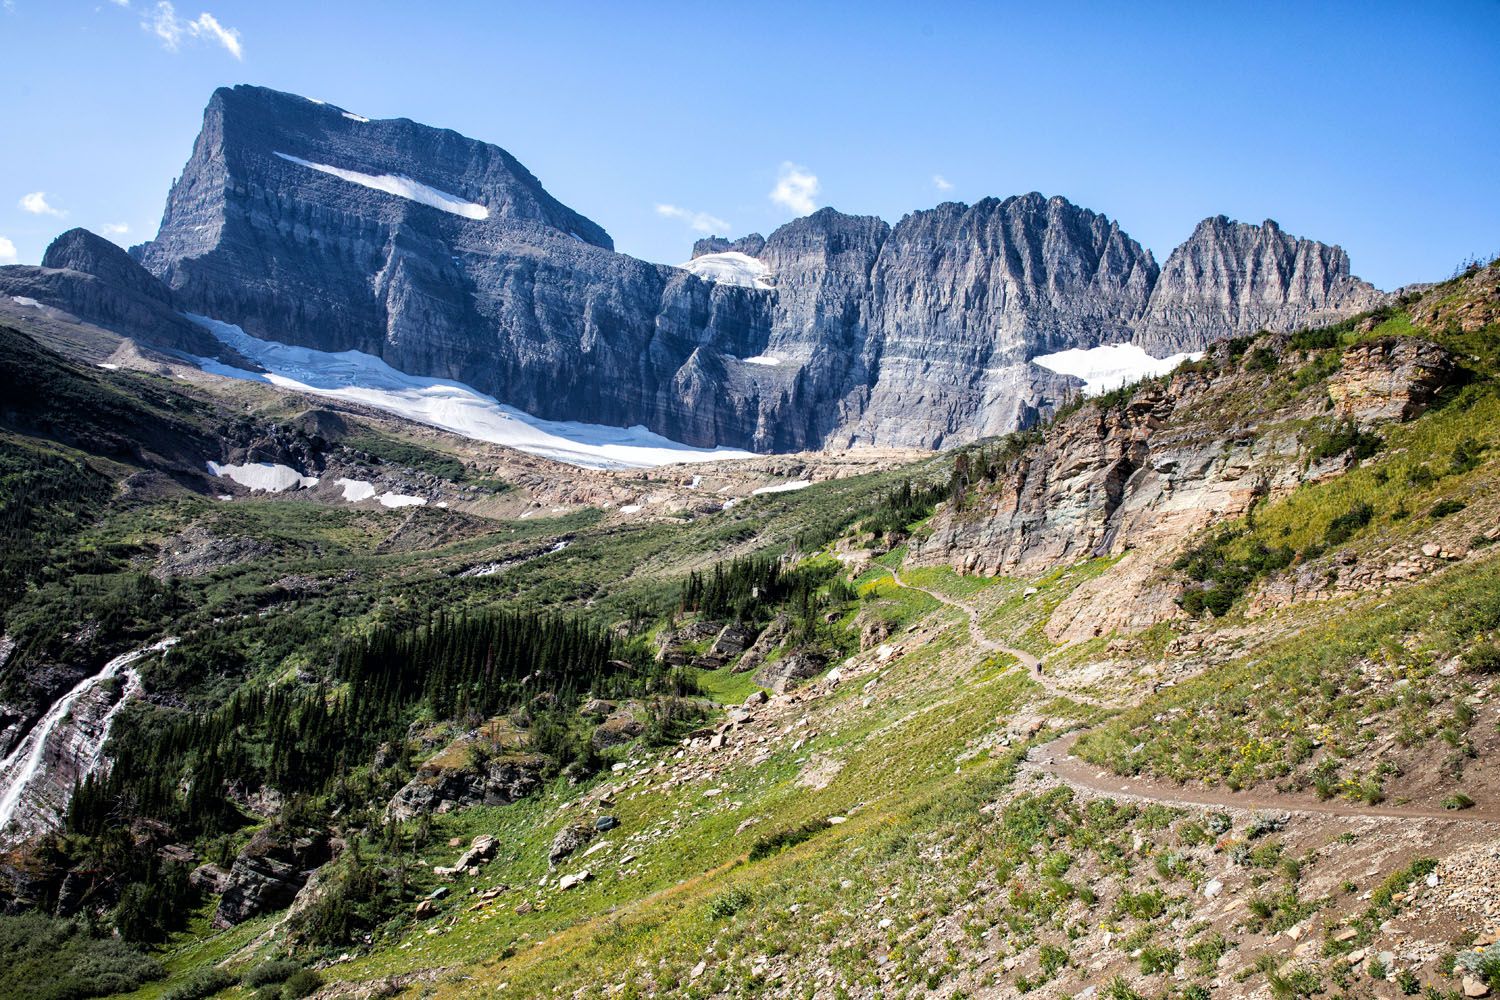 Hiking to Grinnell Glacier